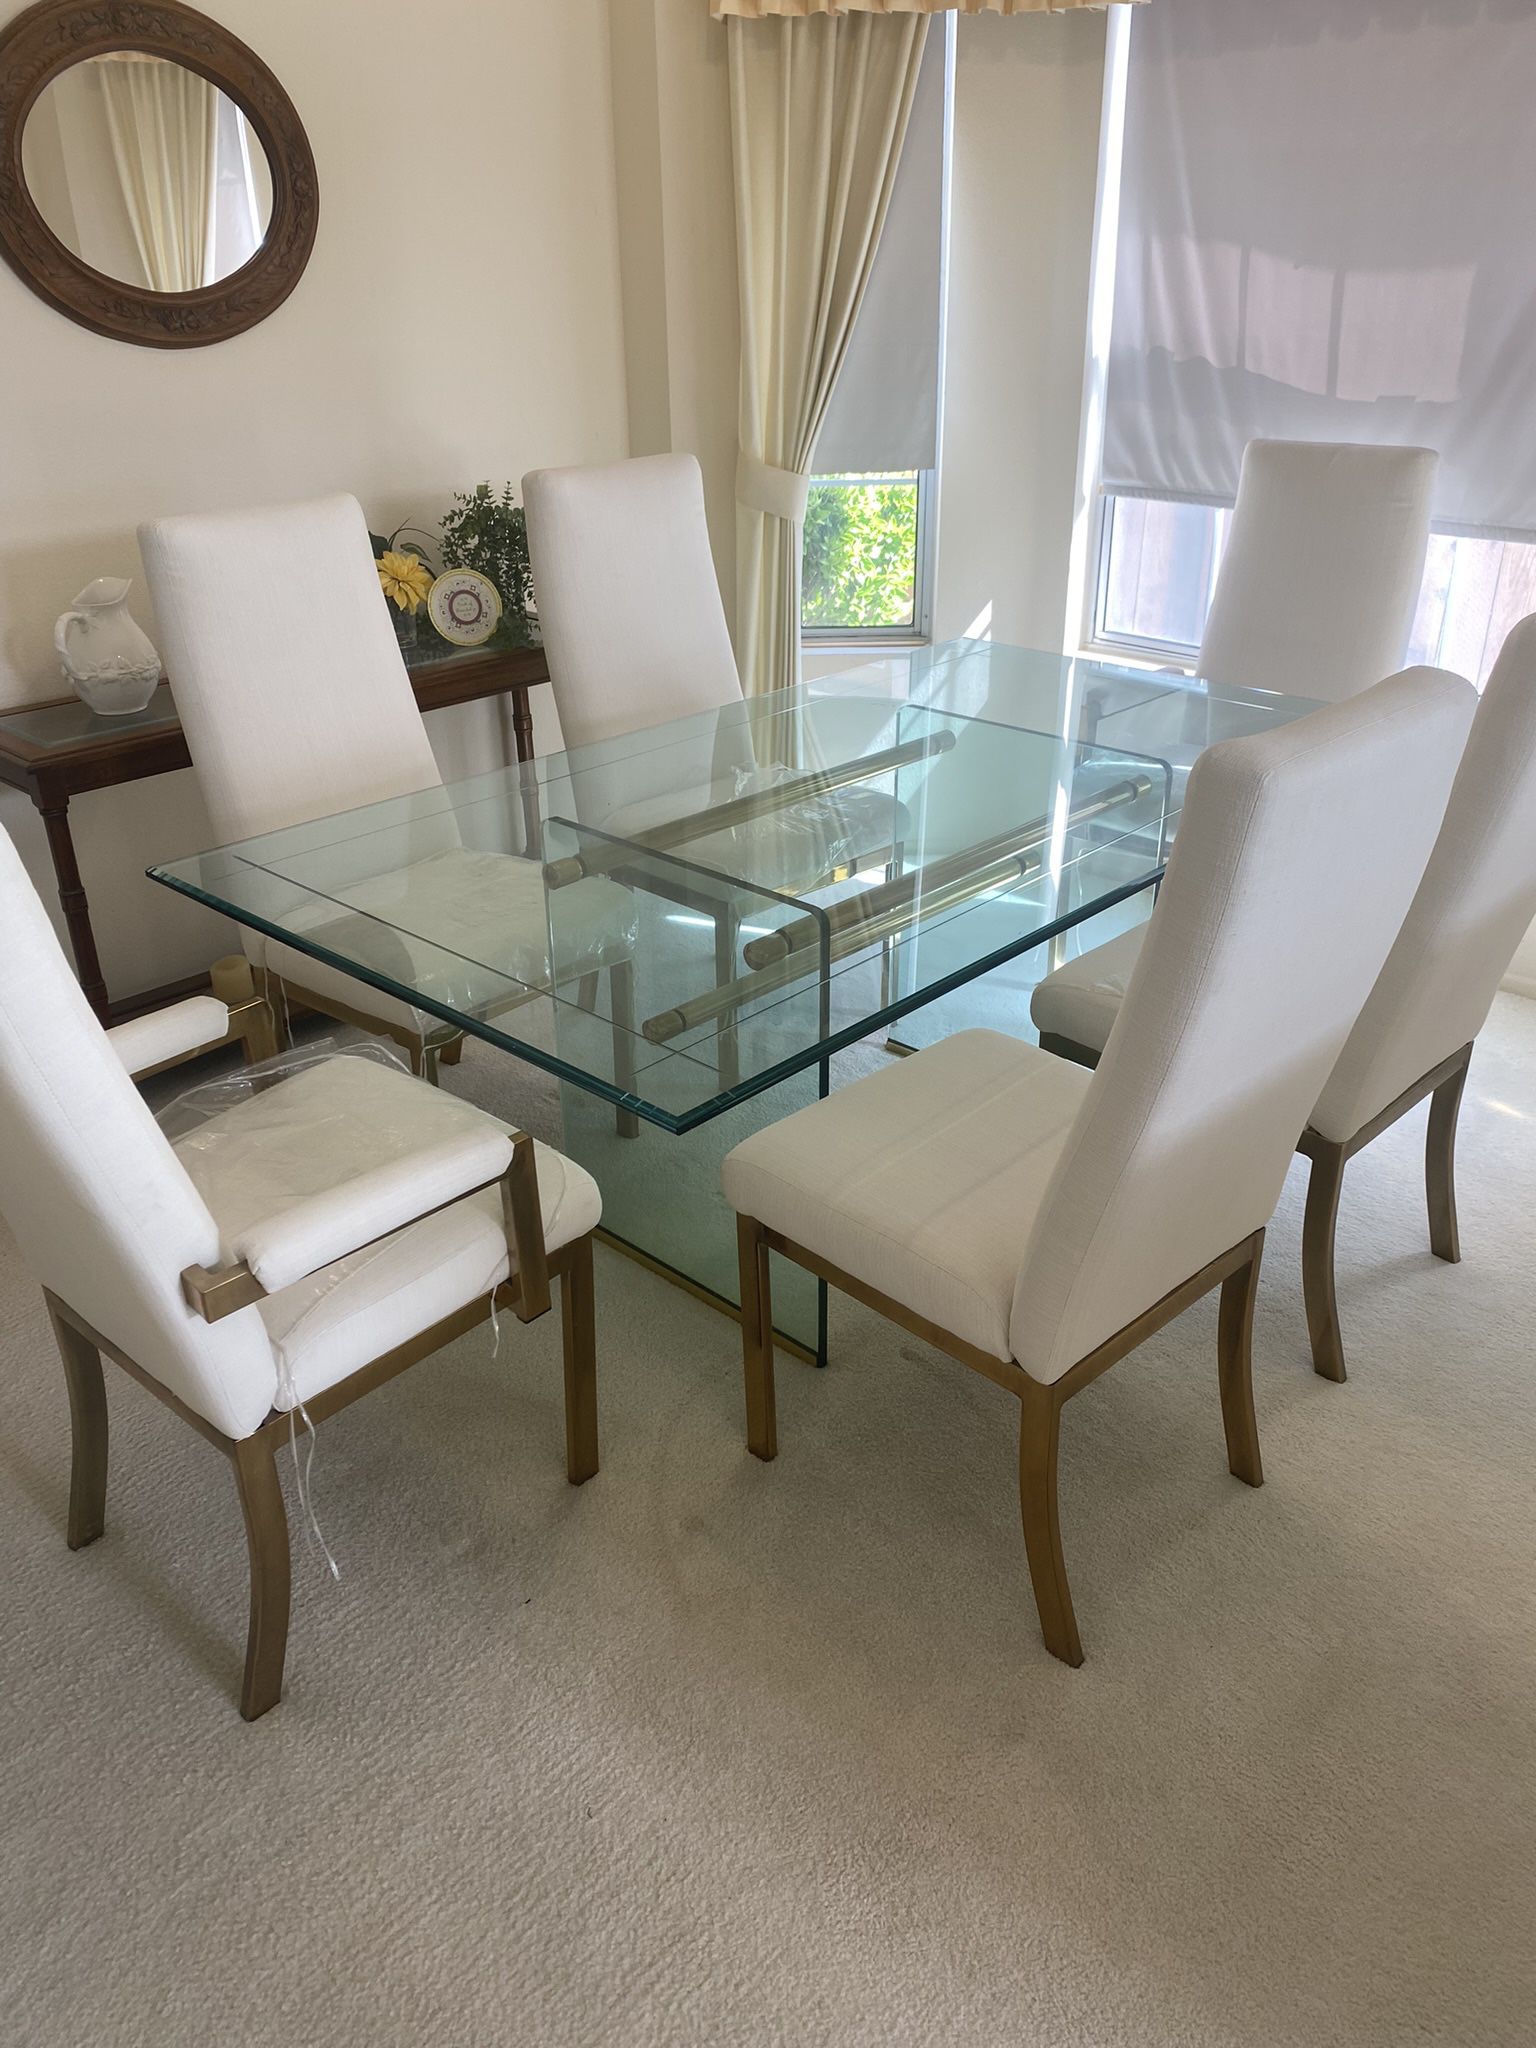 Dining Glass Table & 6 Chairs